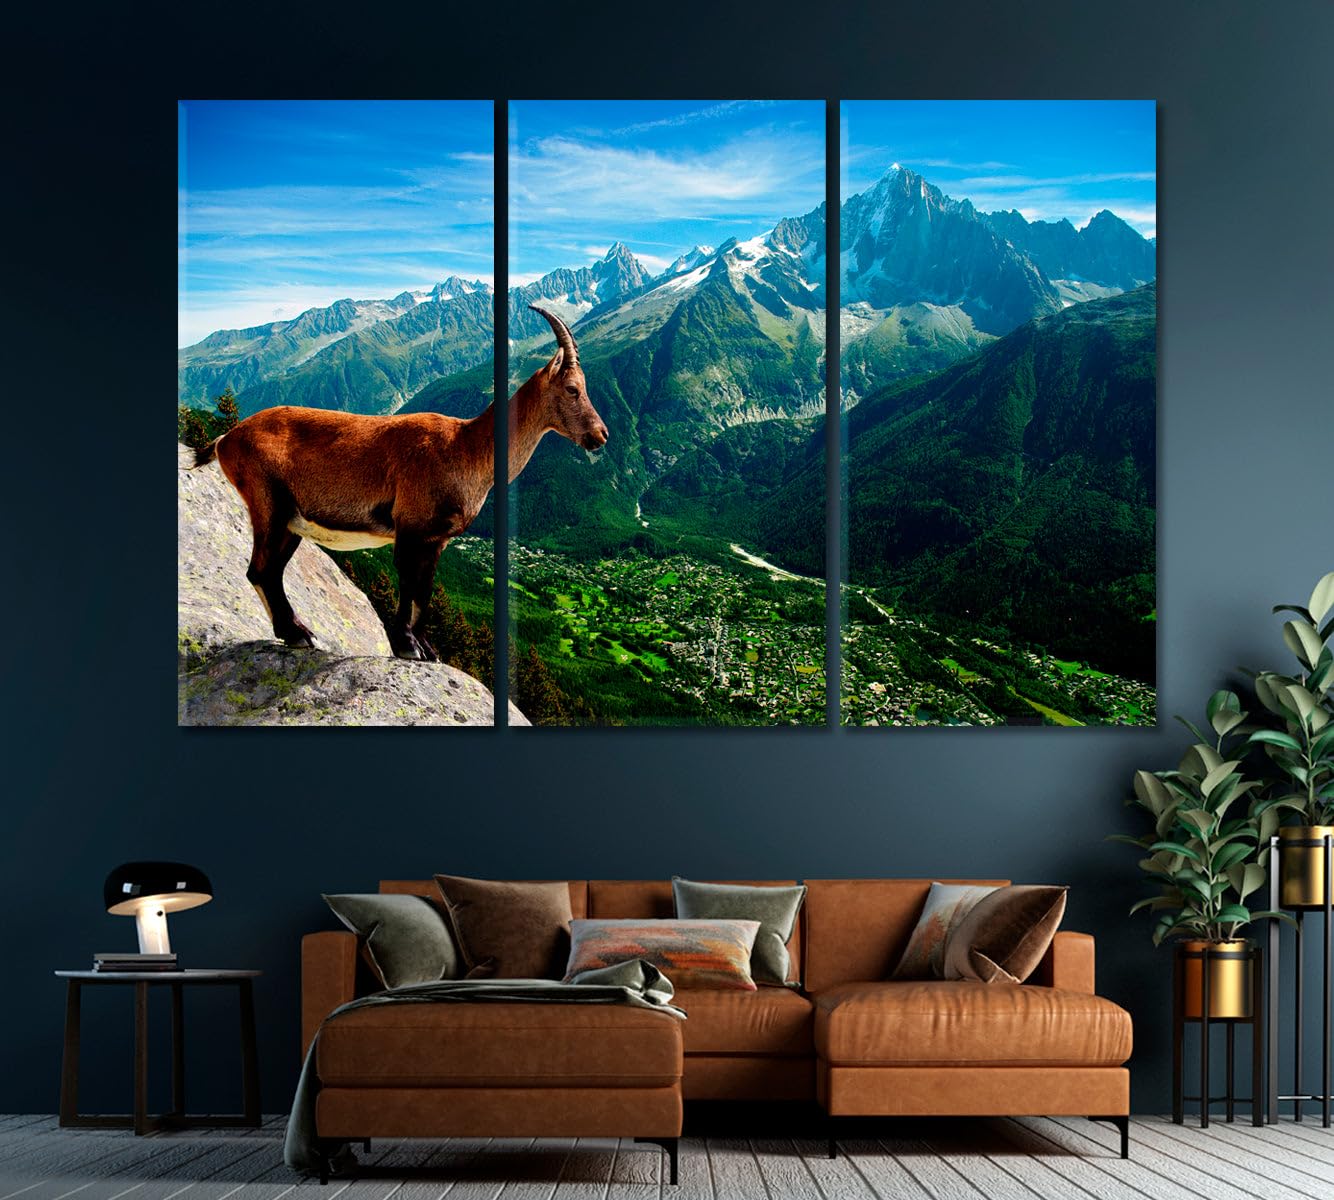 Mountain Goat Looks at Landscape Canvas Print 5 Panels / 36x24 inches